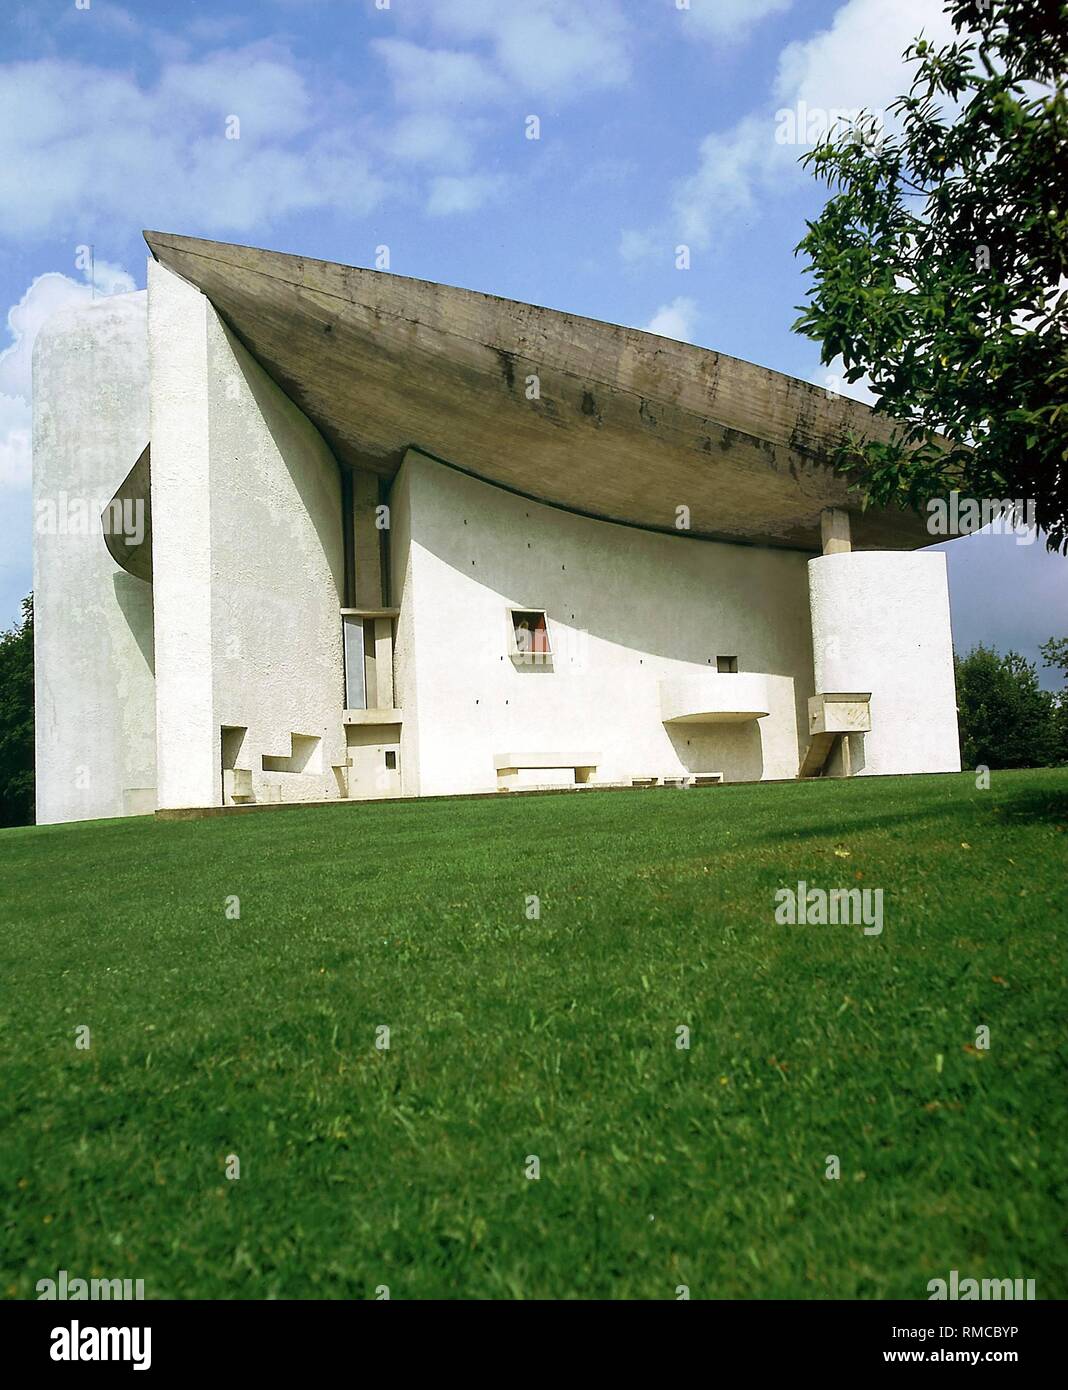 The pilgrimage church 'Notre-Dame-du-Haut' by Le Corbusier in Ronchamp in France. Stock Photo